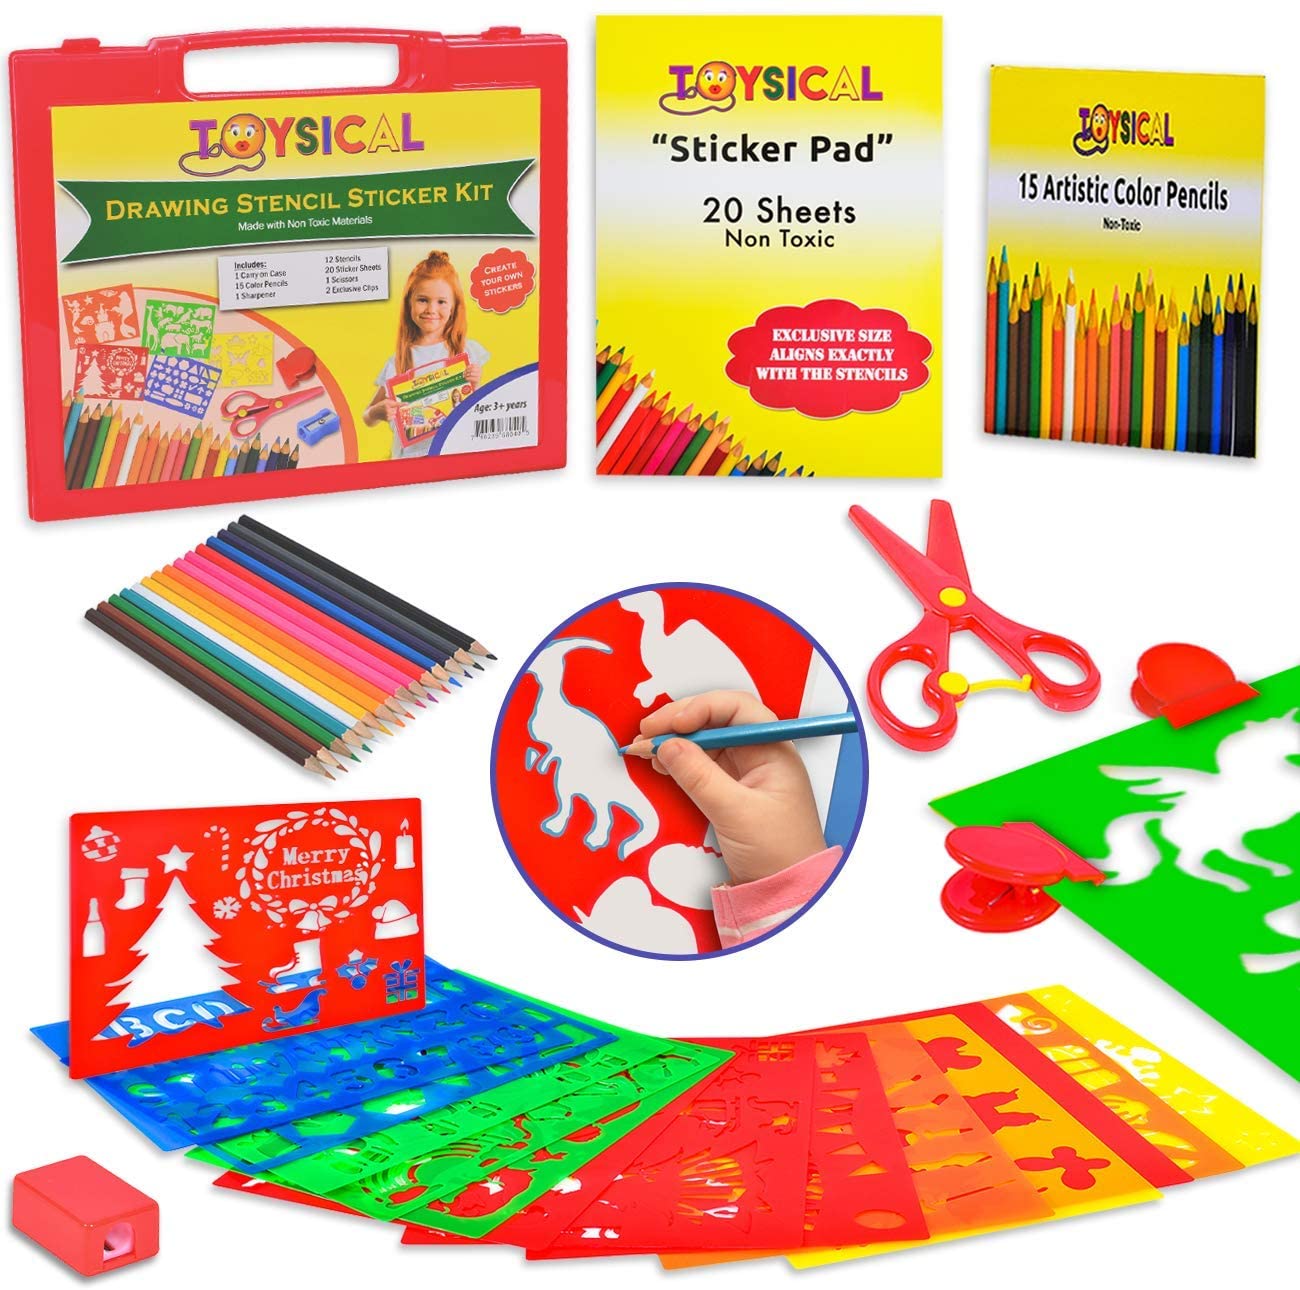 Drawing Stencils for Kids Kit & Carry Case – – Child-Safe, Non-Toxic  Stencil Set with 300 Shapes, Colored Pencils, Paper, Etc. – Travel Art  Supplies